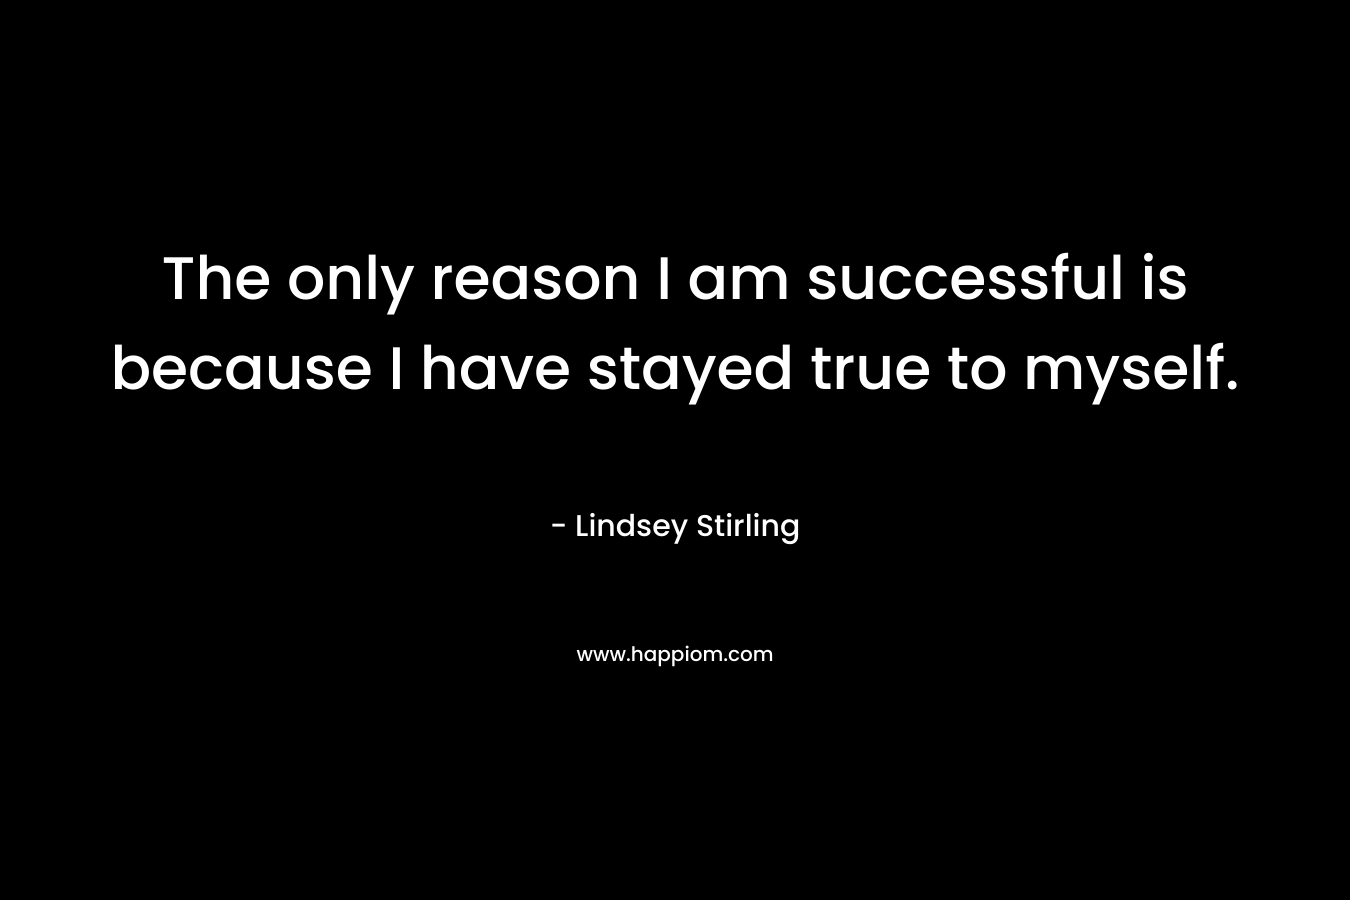 The only reason I am successful is because I have stayed true to myself. – Lindsey Stirling